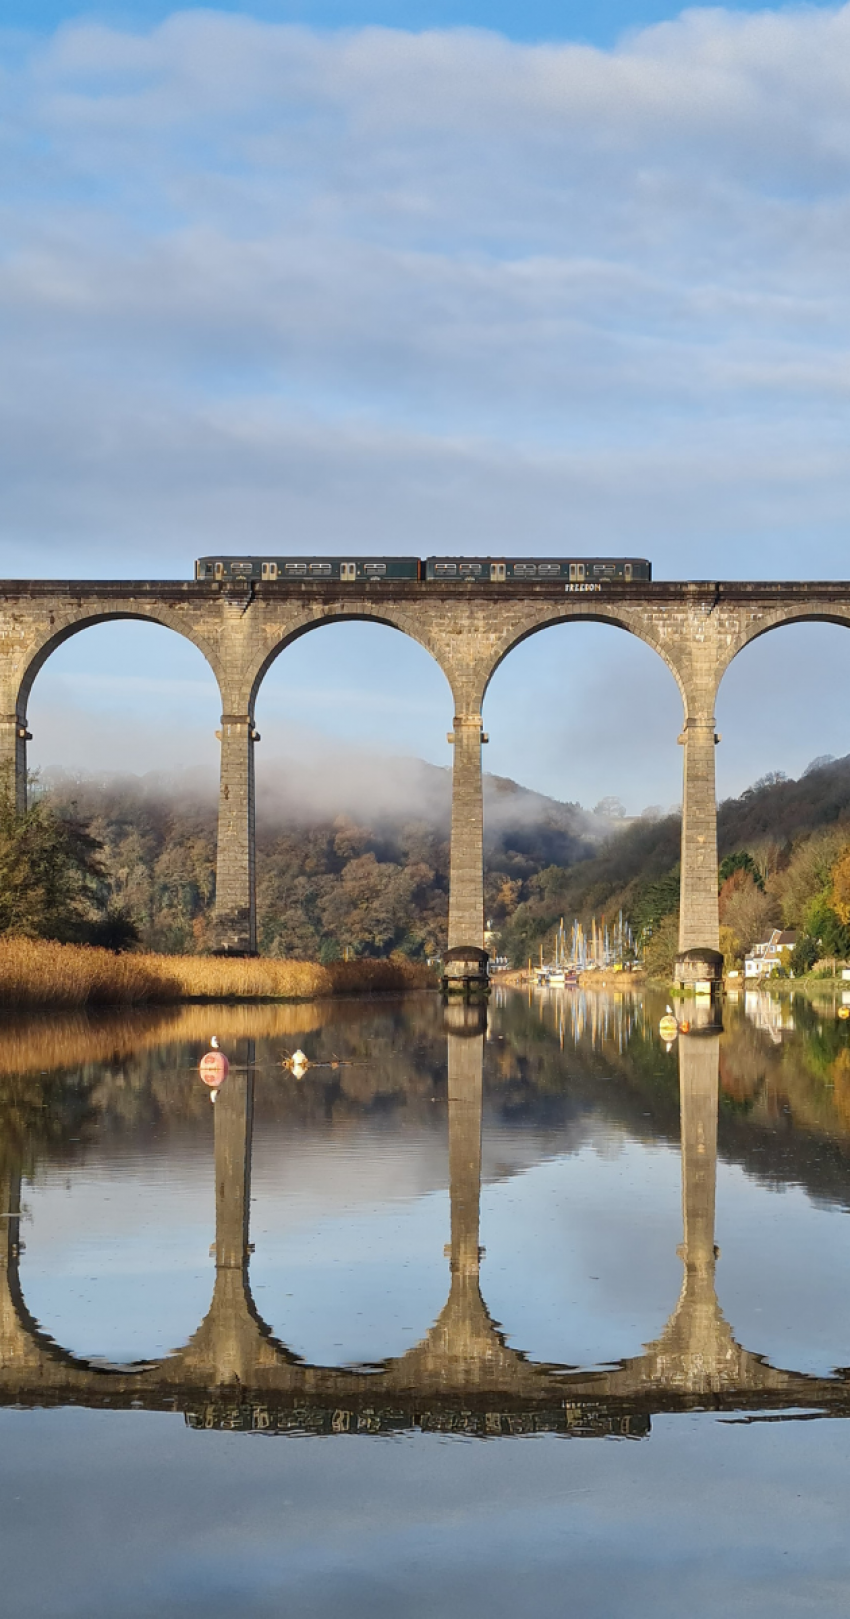 Train travelling across Calstock Viaduct in the winter sun